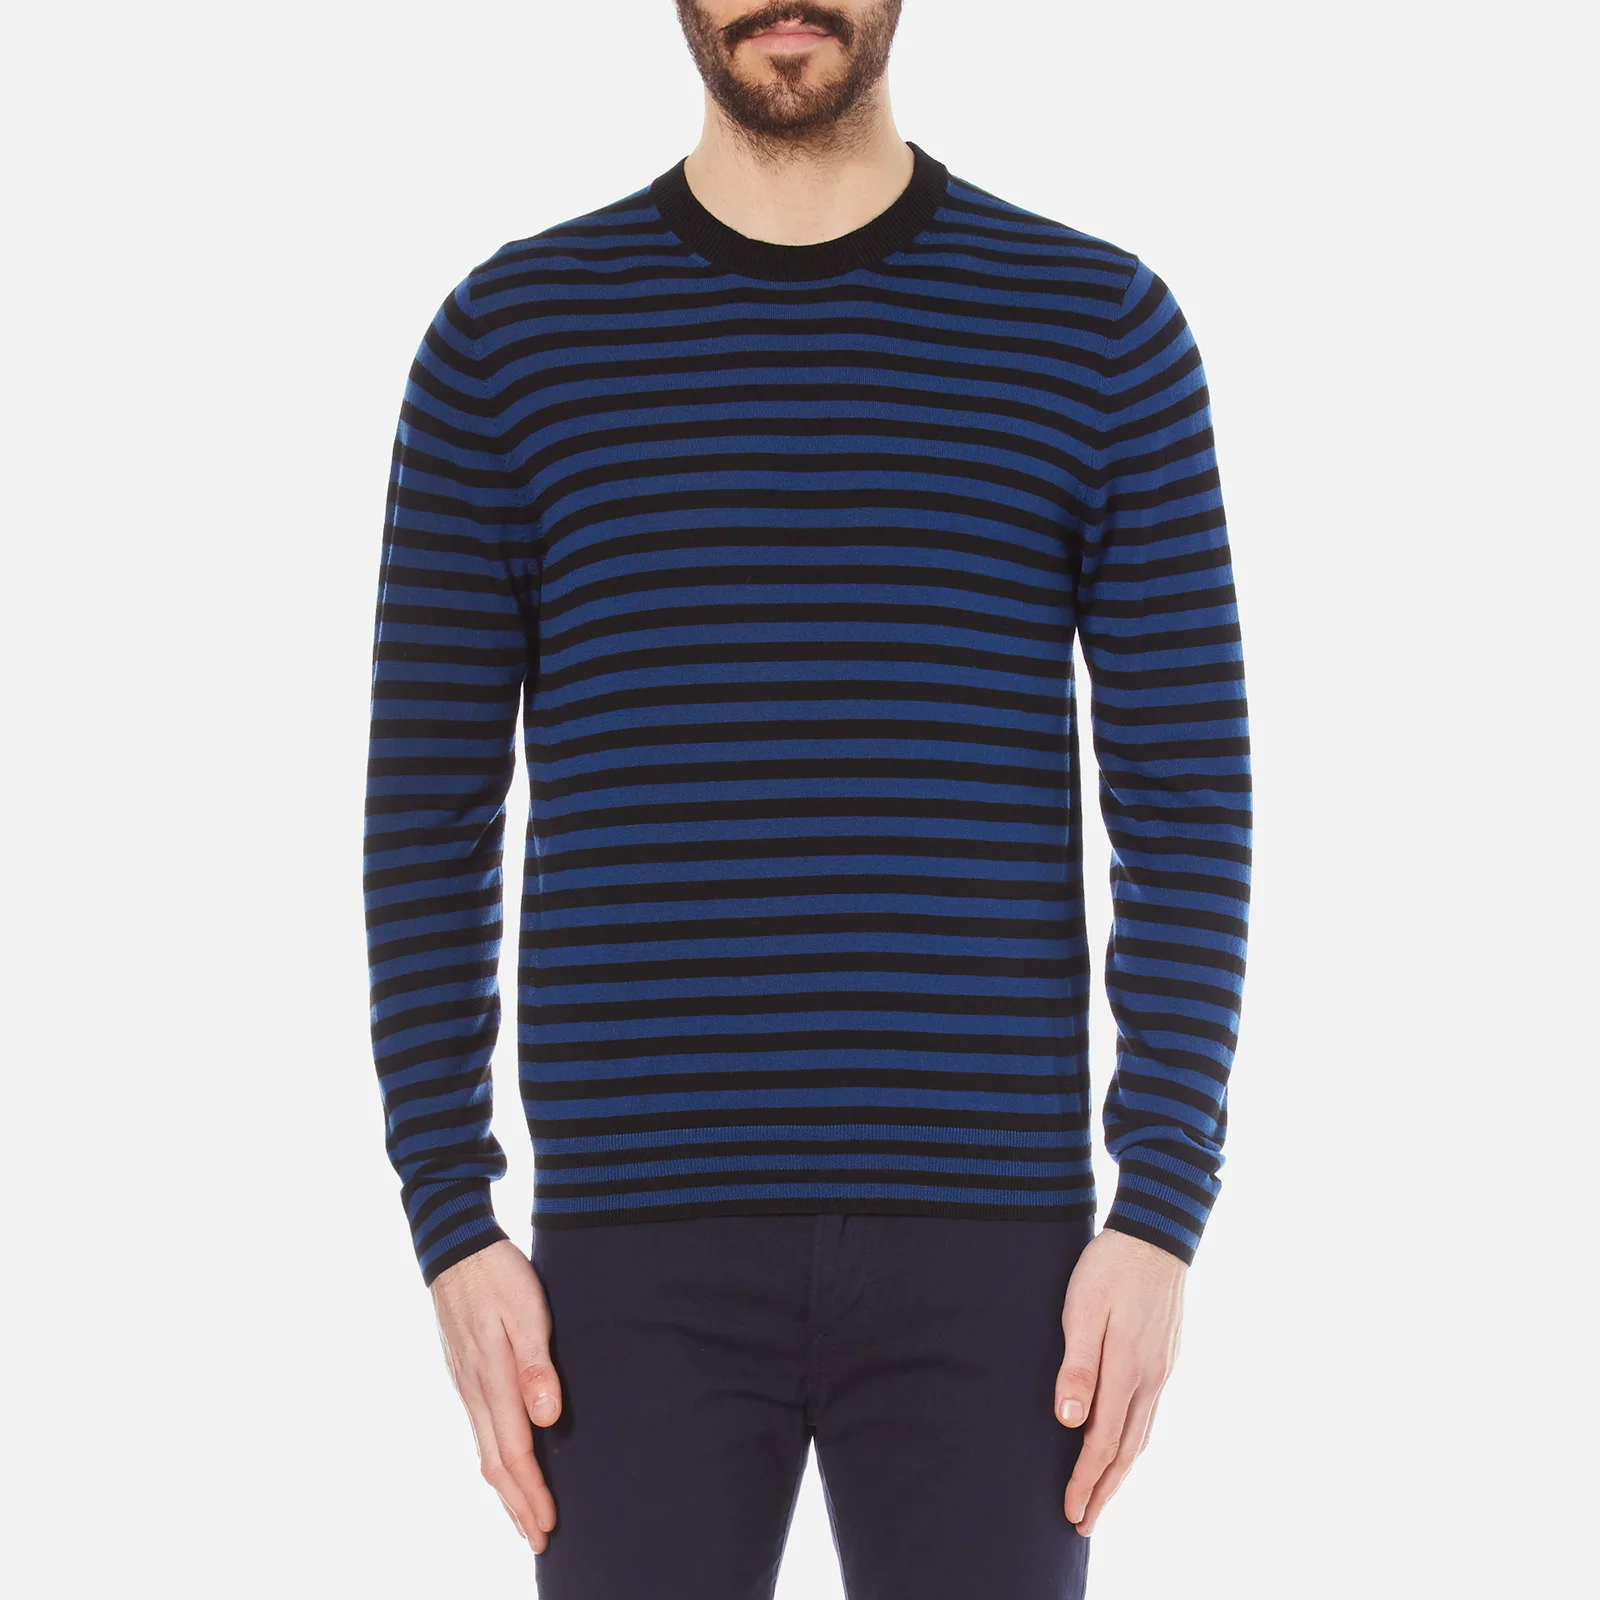 PS by Paul Smith Men's Crew Neck Collar Detail Knitted Jumper - Black Image 1